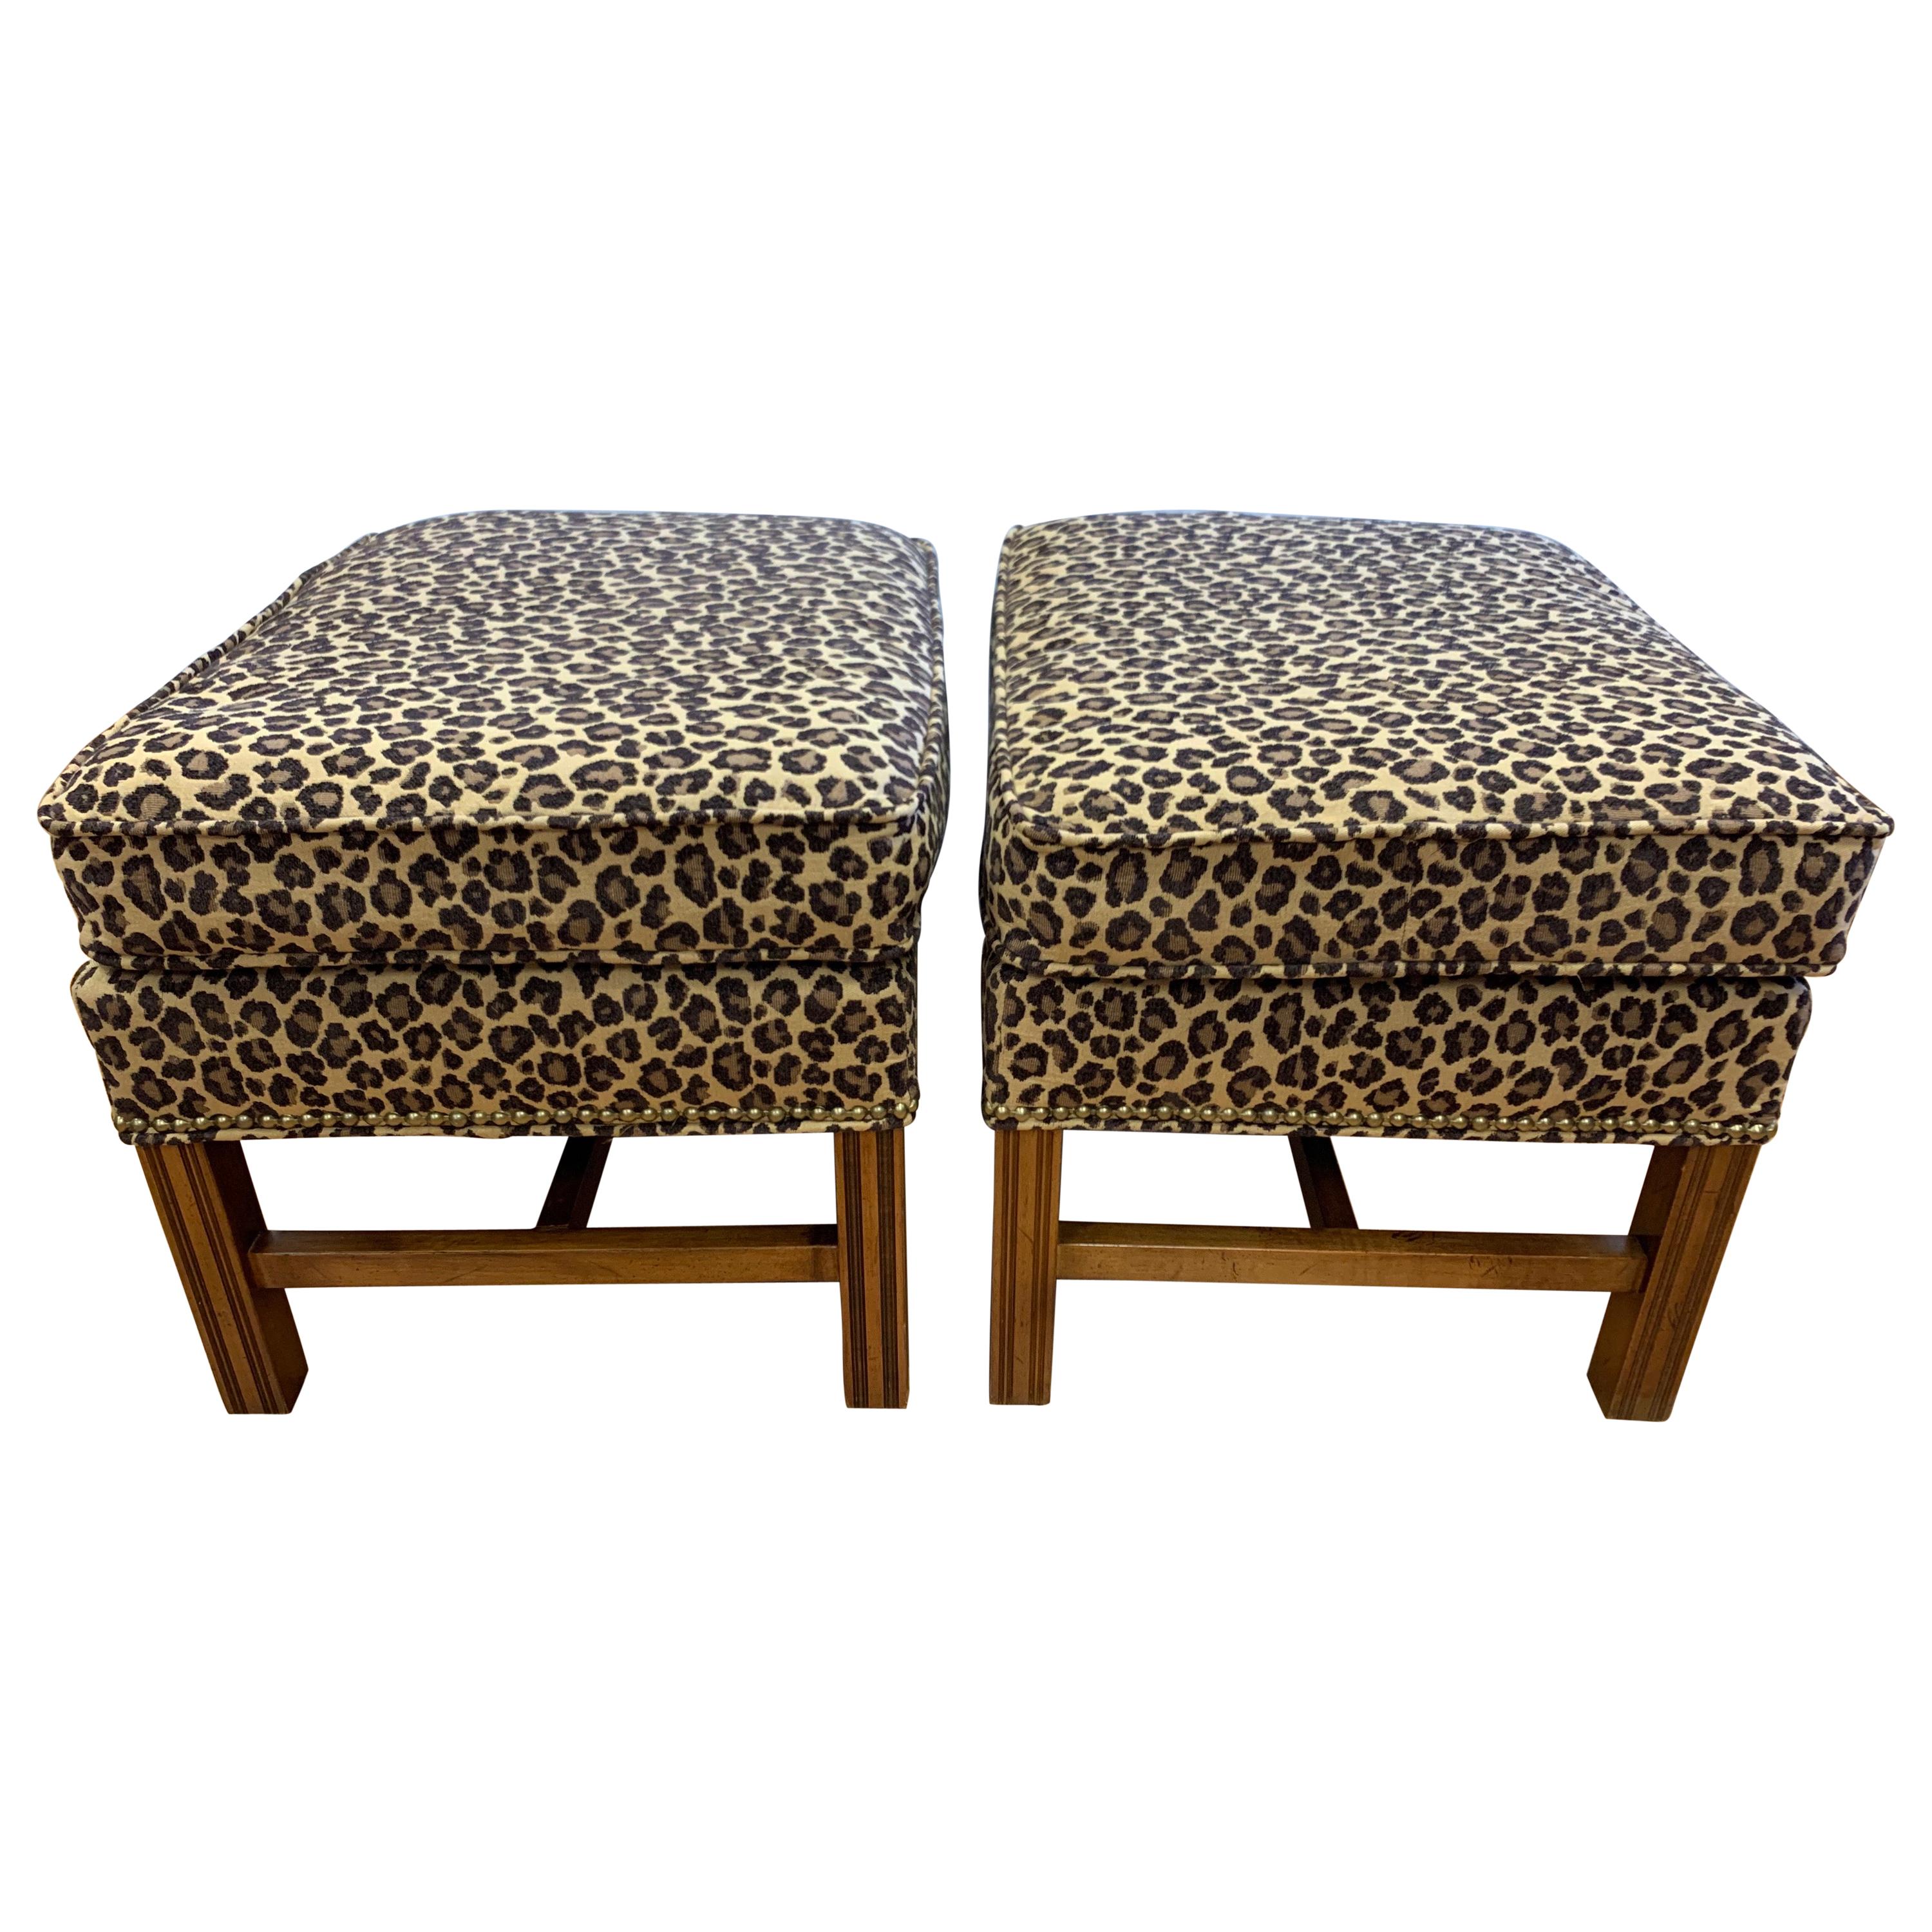 Pair of Berhardt Leopard Print Ottomans Stools Nailhead Newly Upholstered